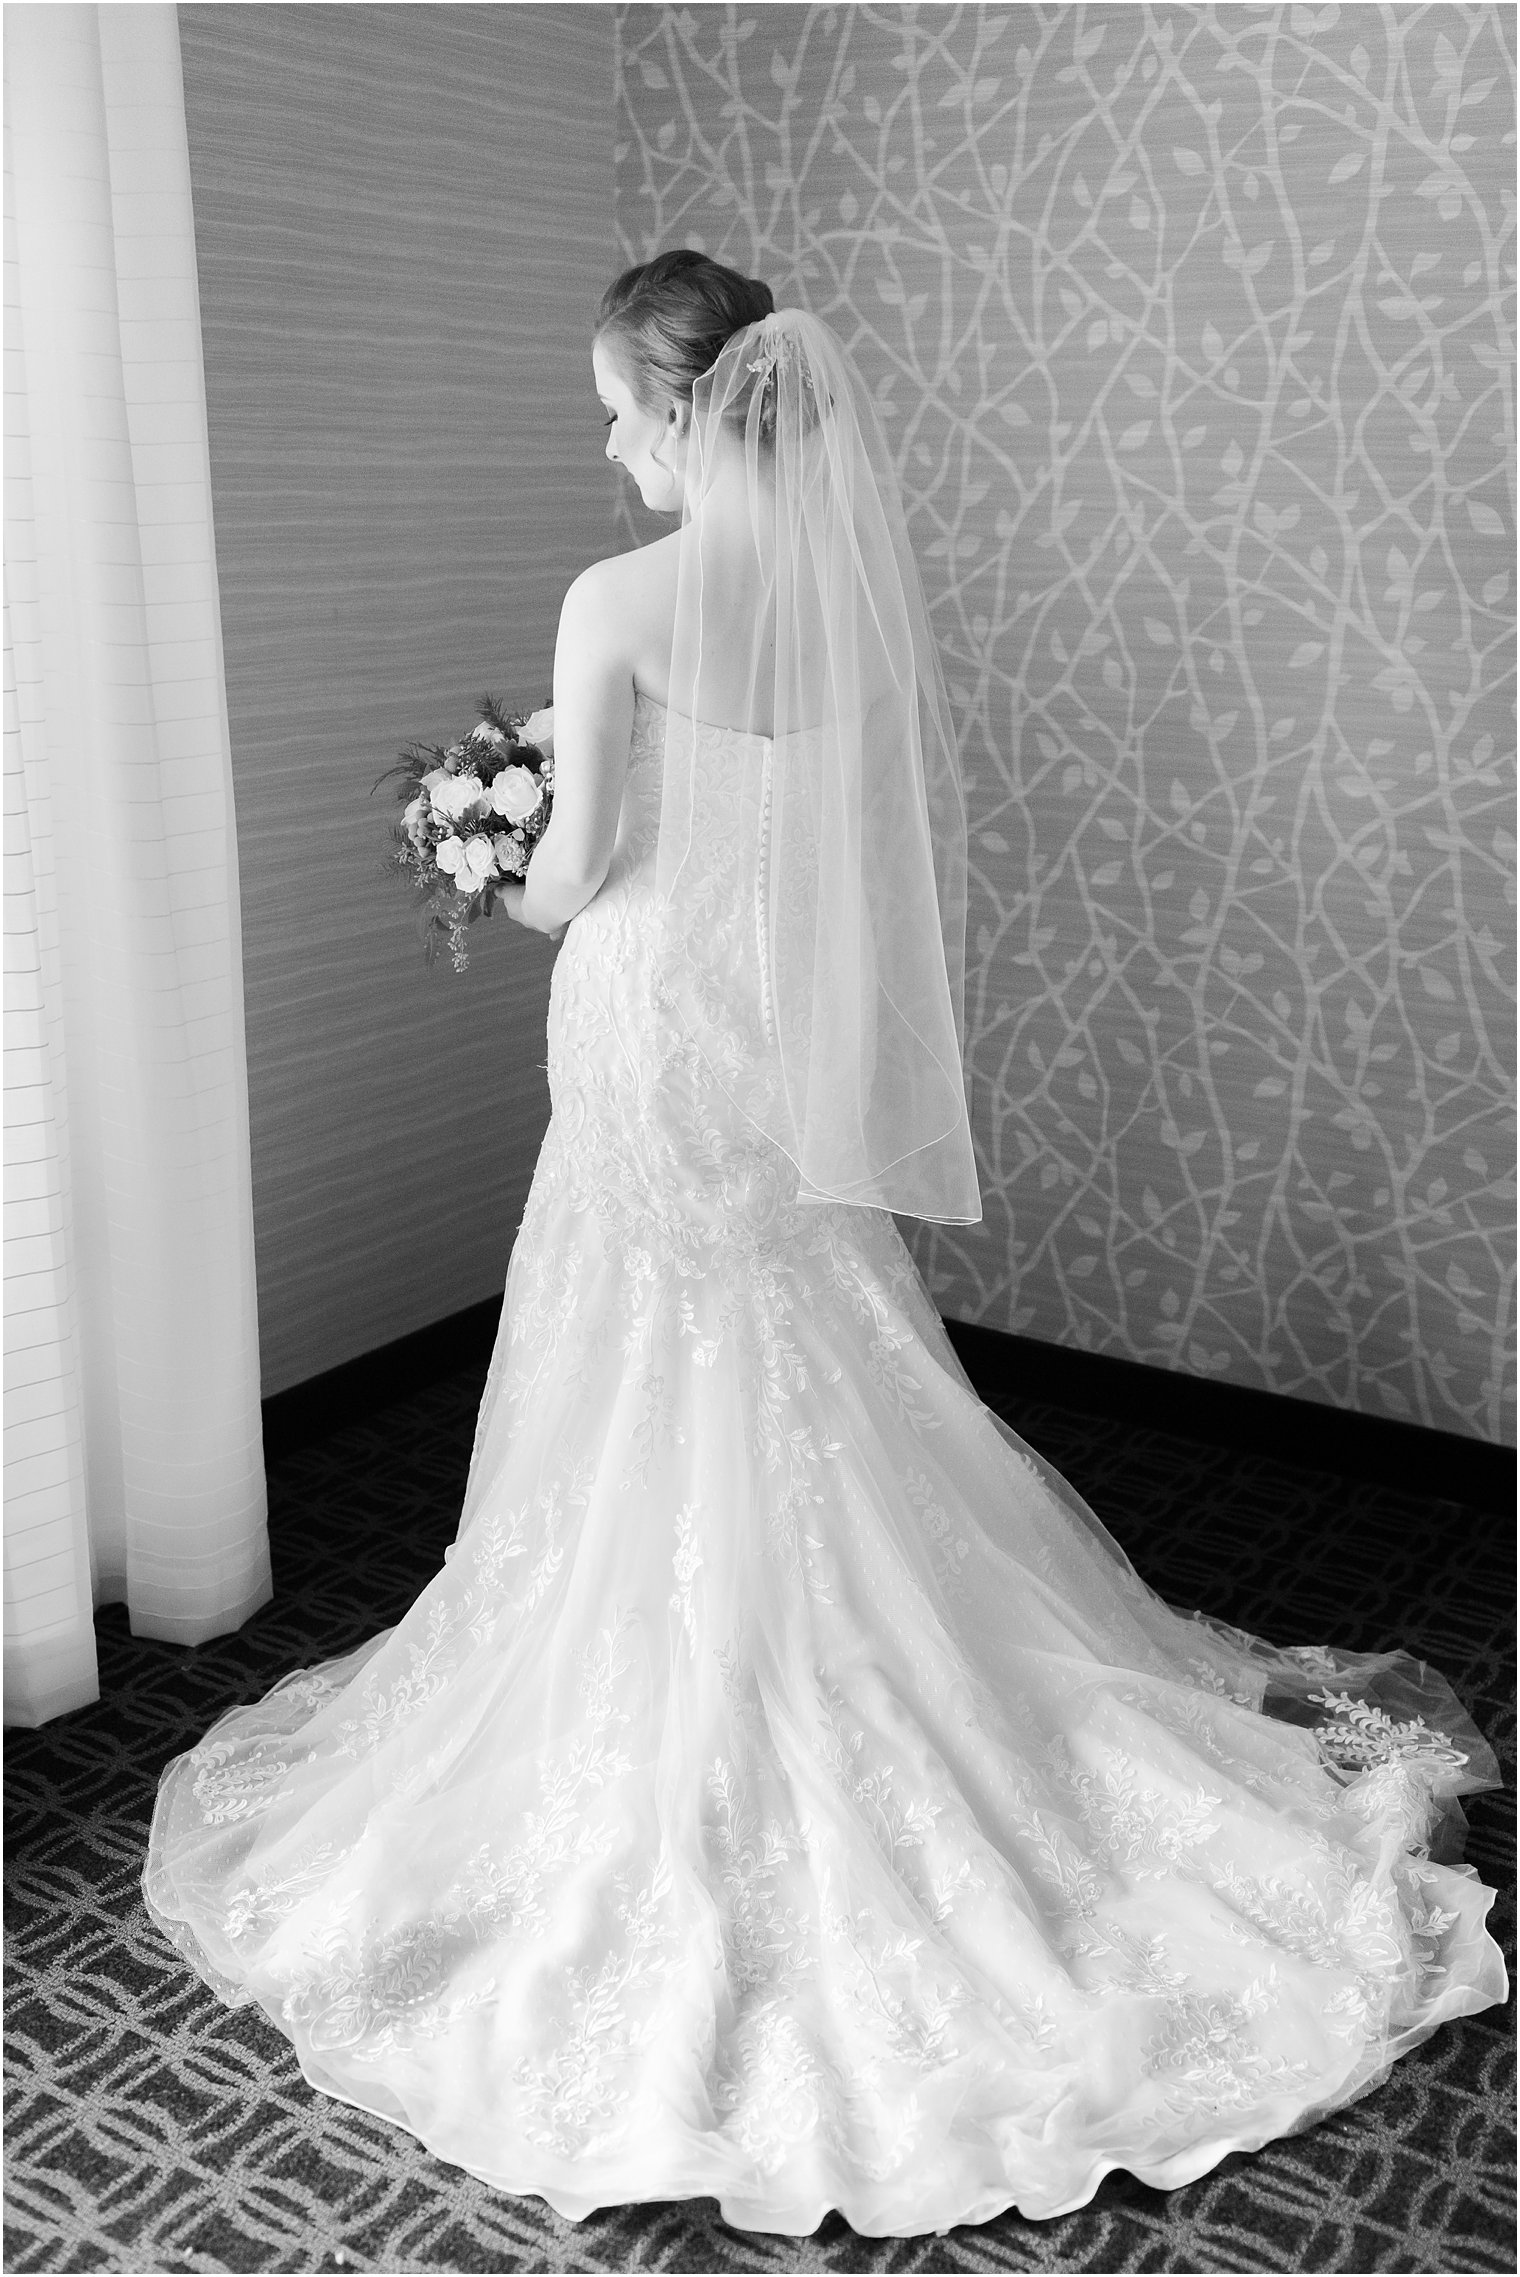 Black and white photo of bride from behind